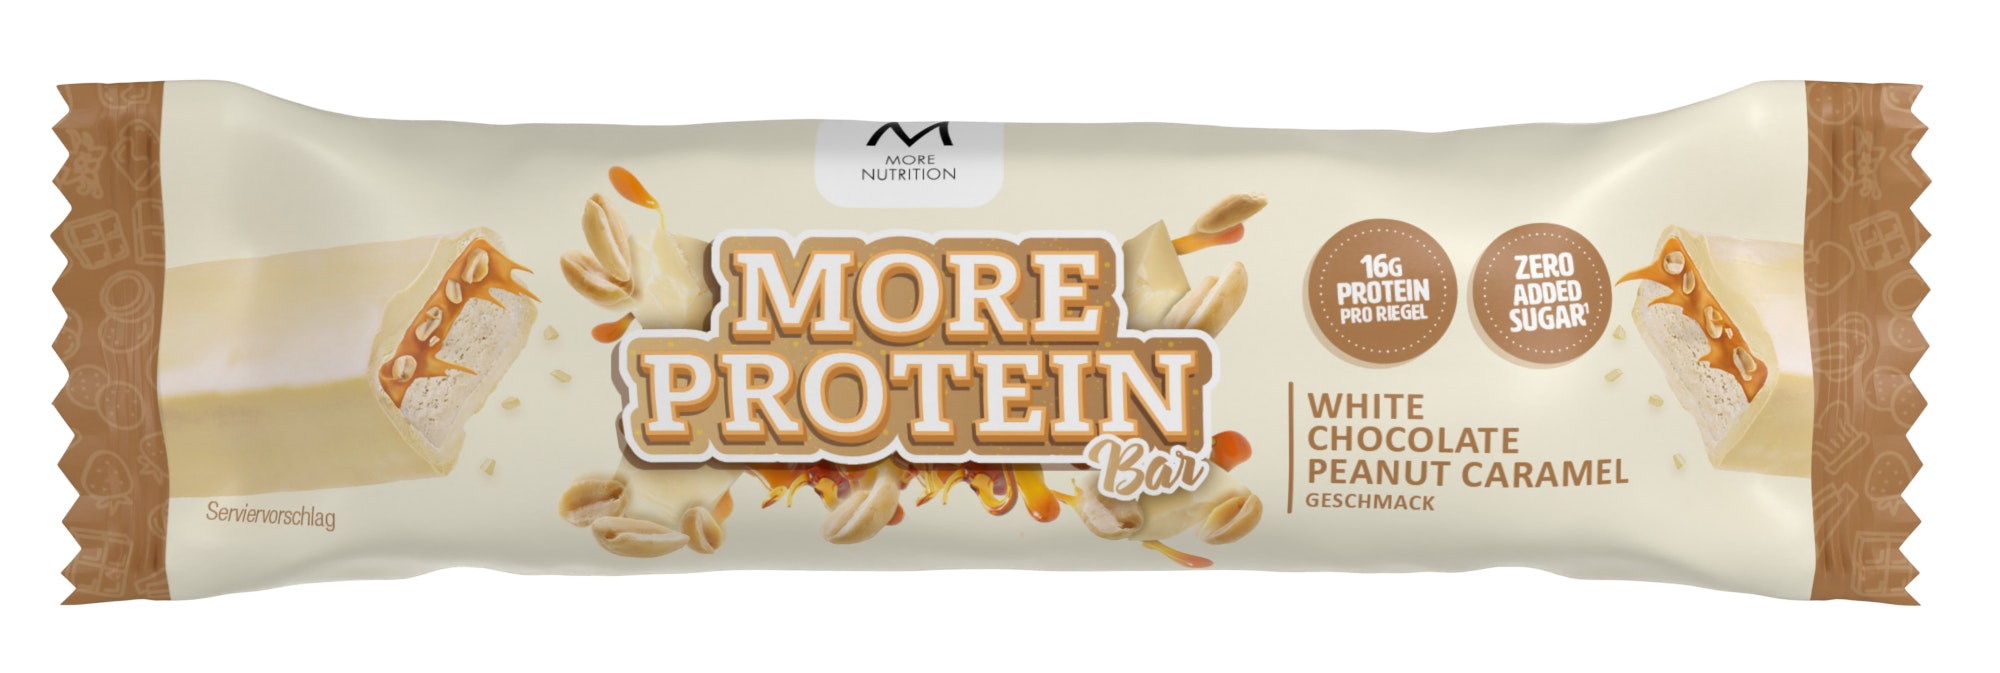 More Protein Bars